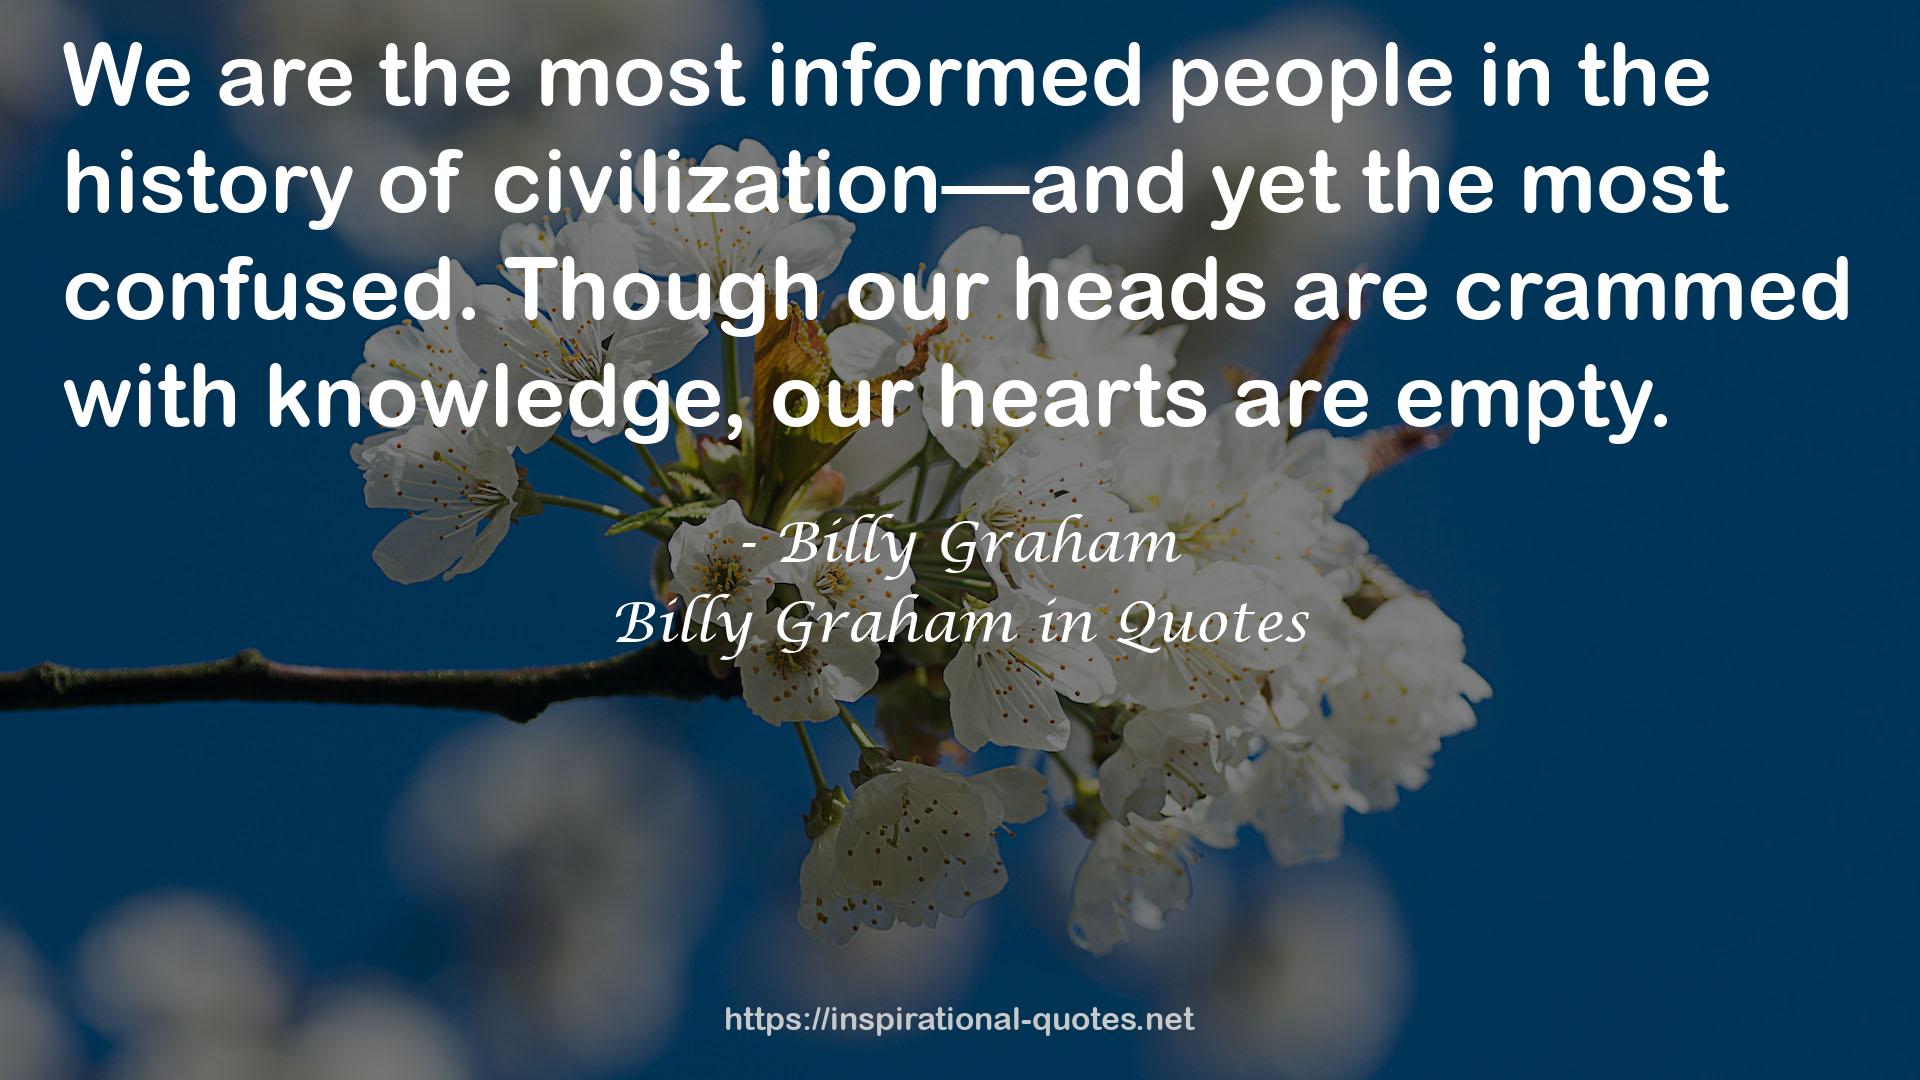 Billy Graham QUOTES